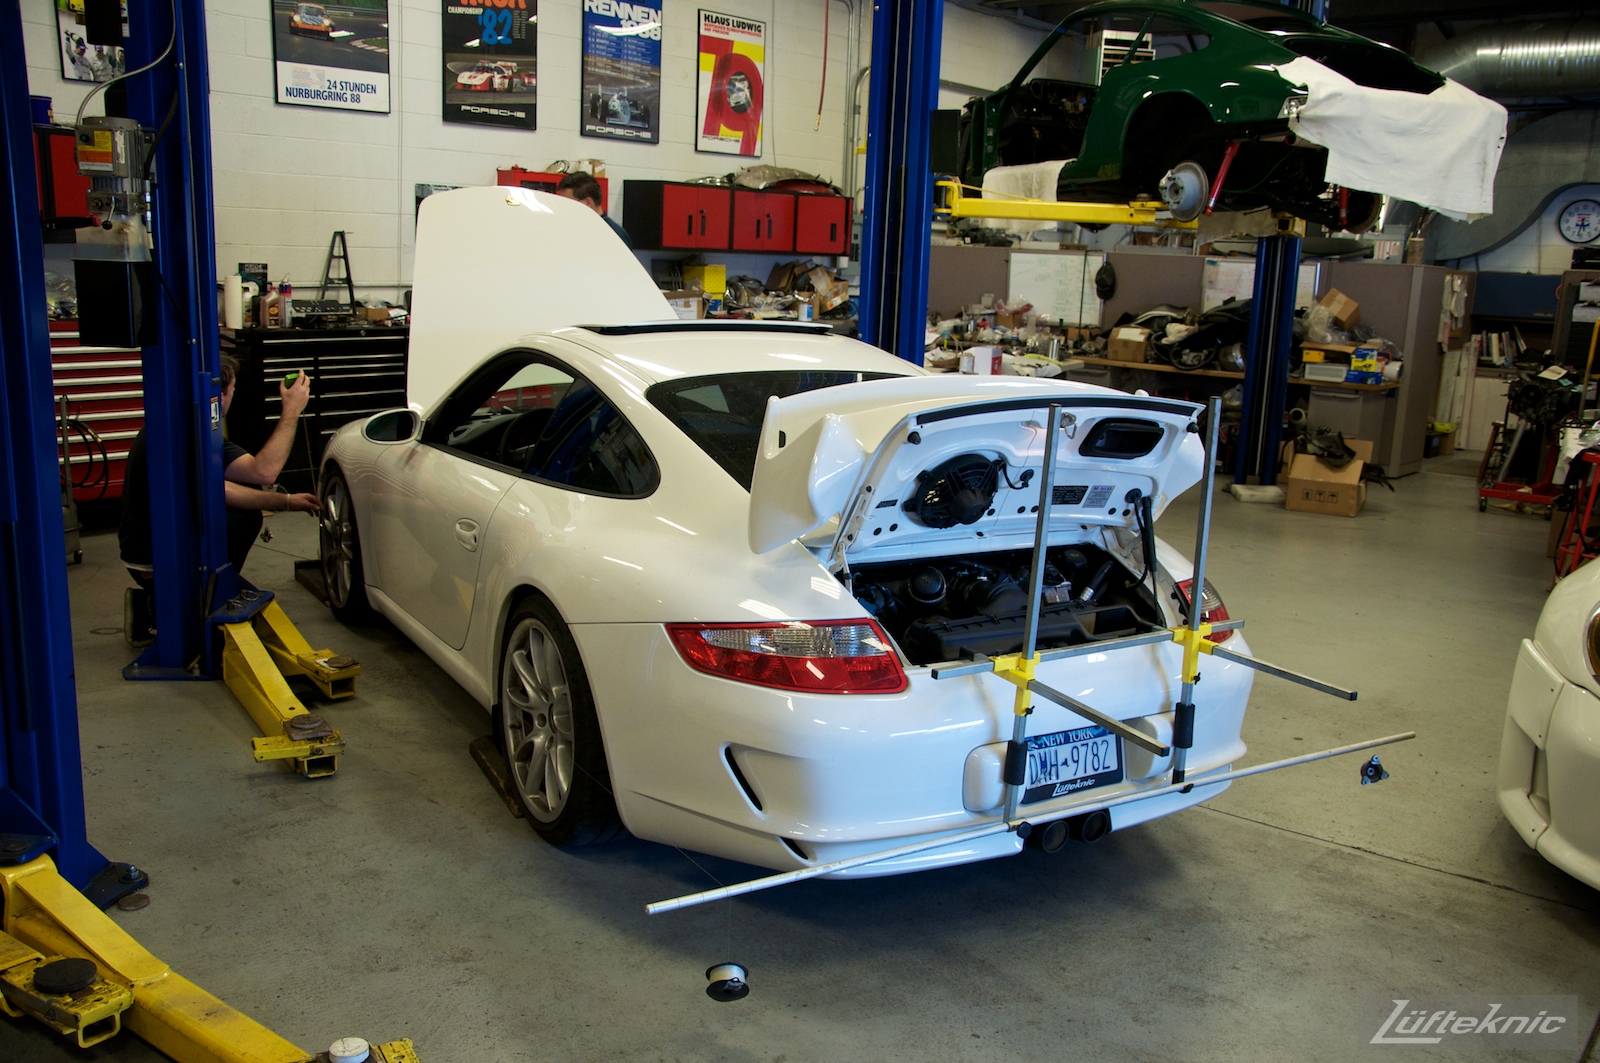 A white 993 GT3 being aligned at the Lufteknic shop.